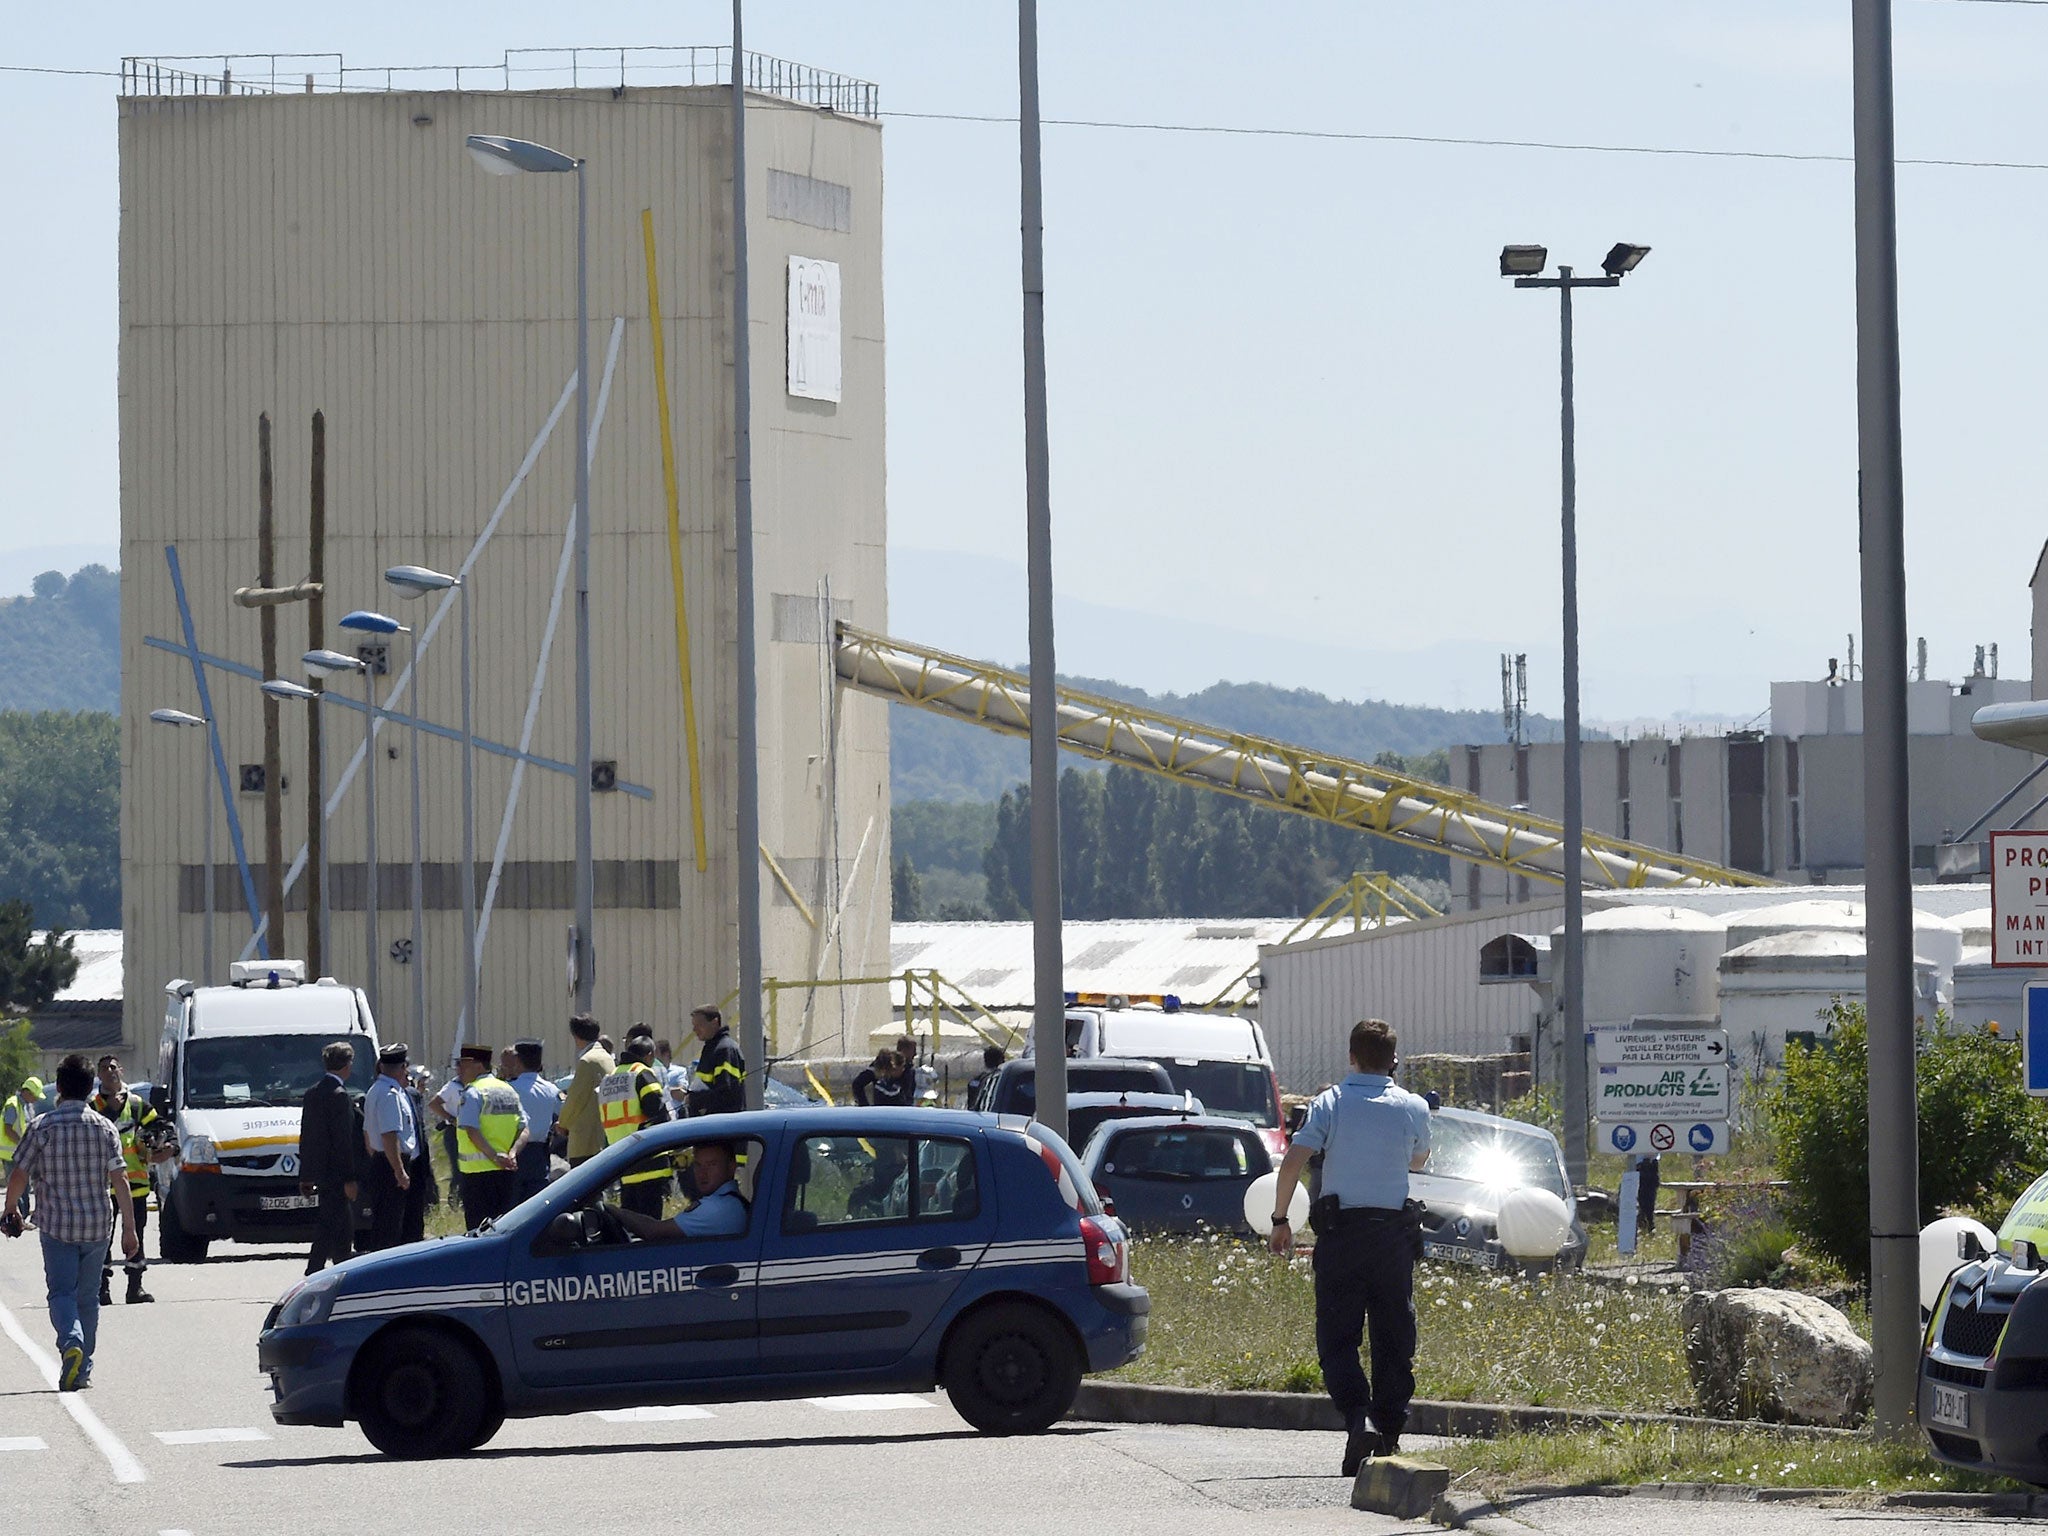 French security and emergency services gather at the entrance of the Air Products company in Saint-Quentin-Fallavier, near Lyon